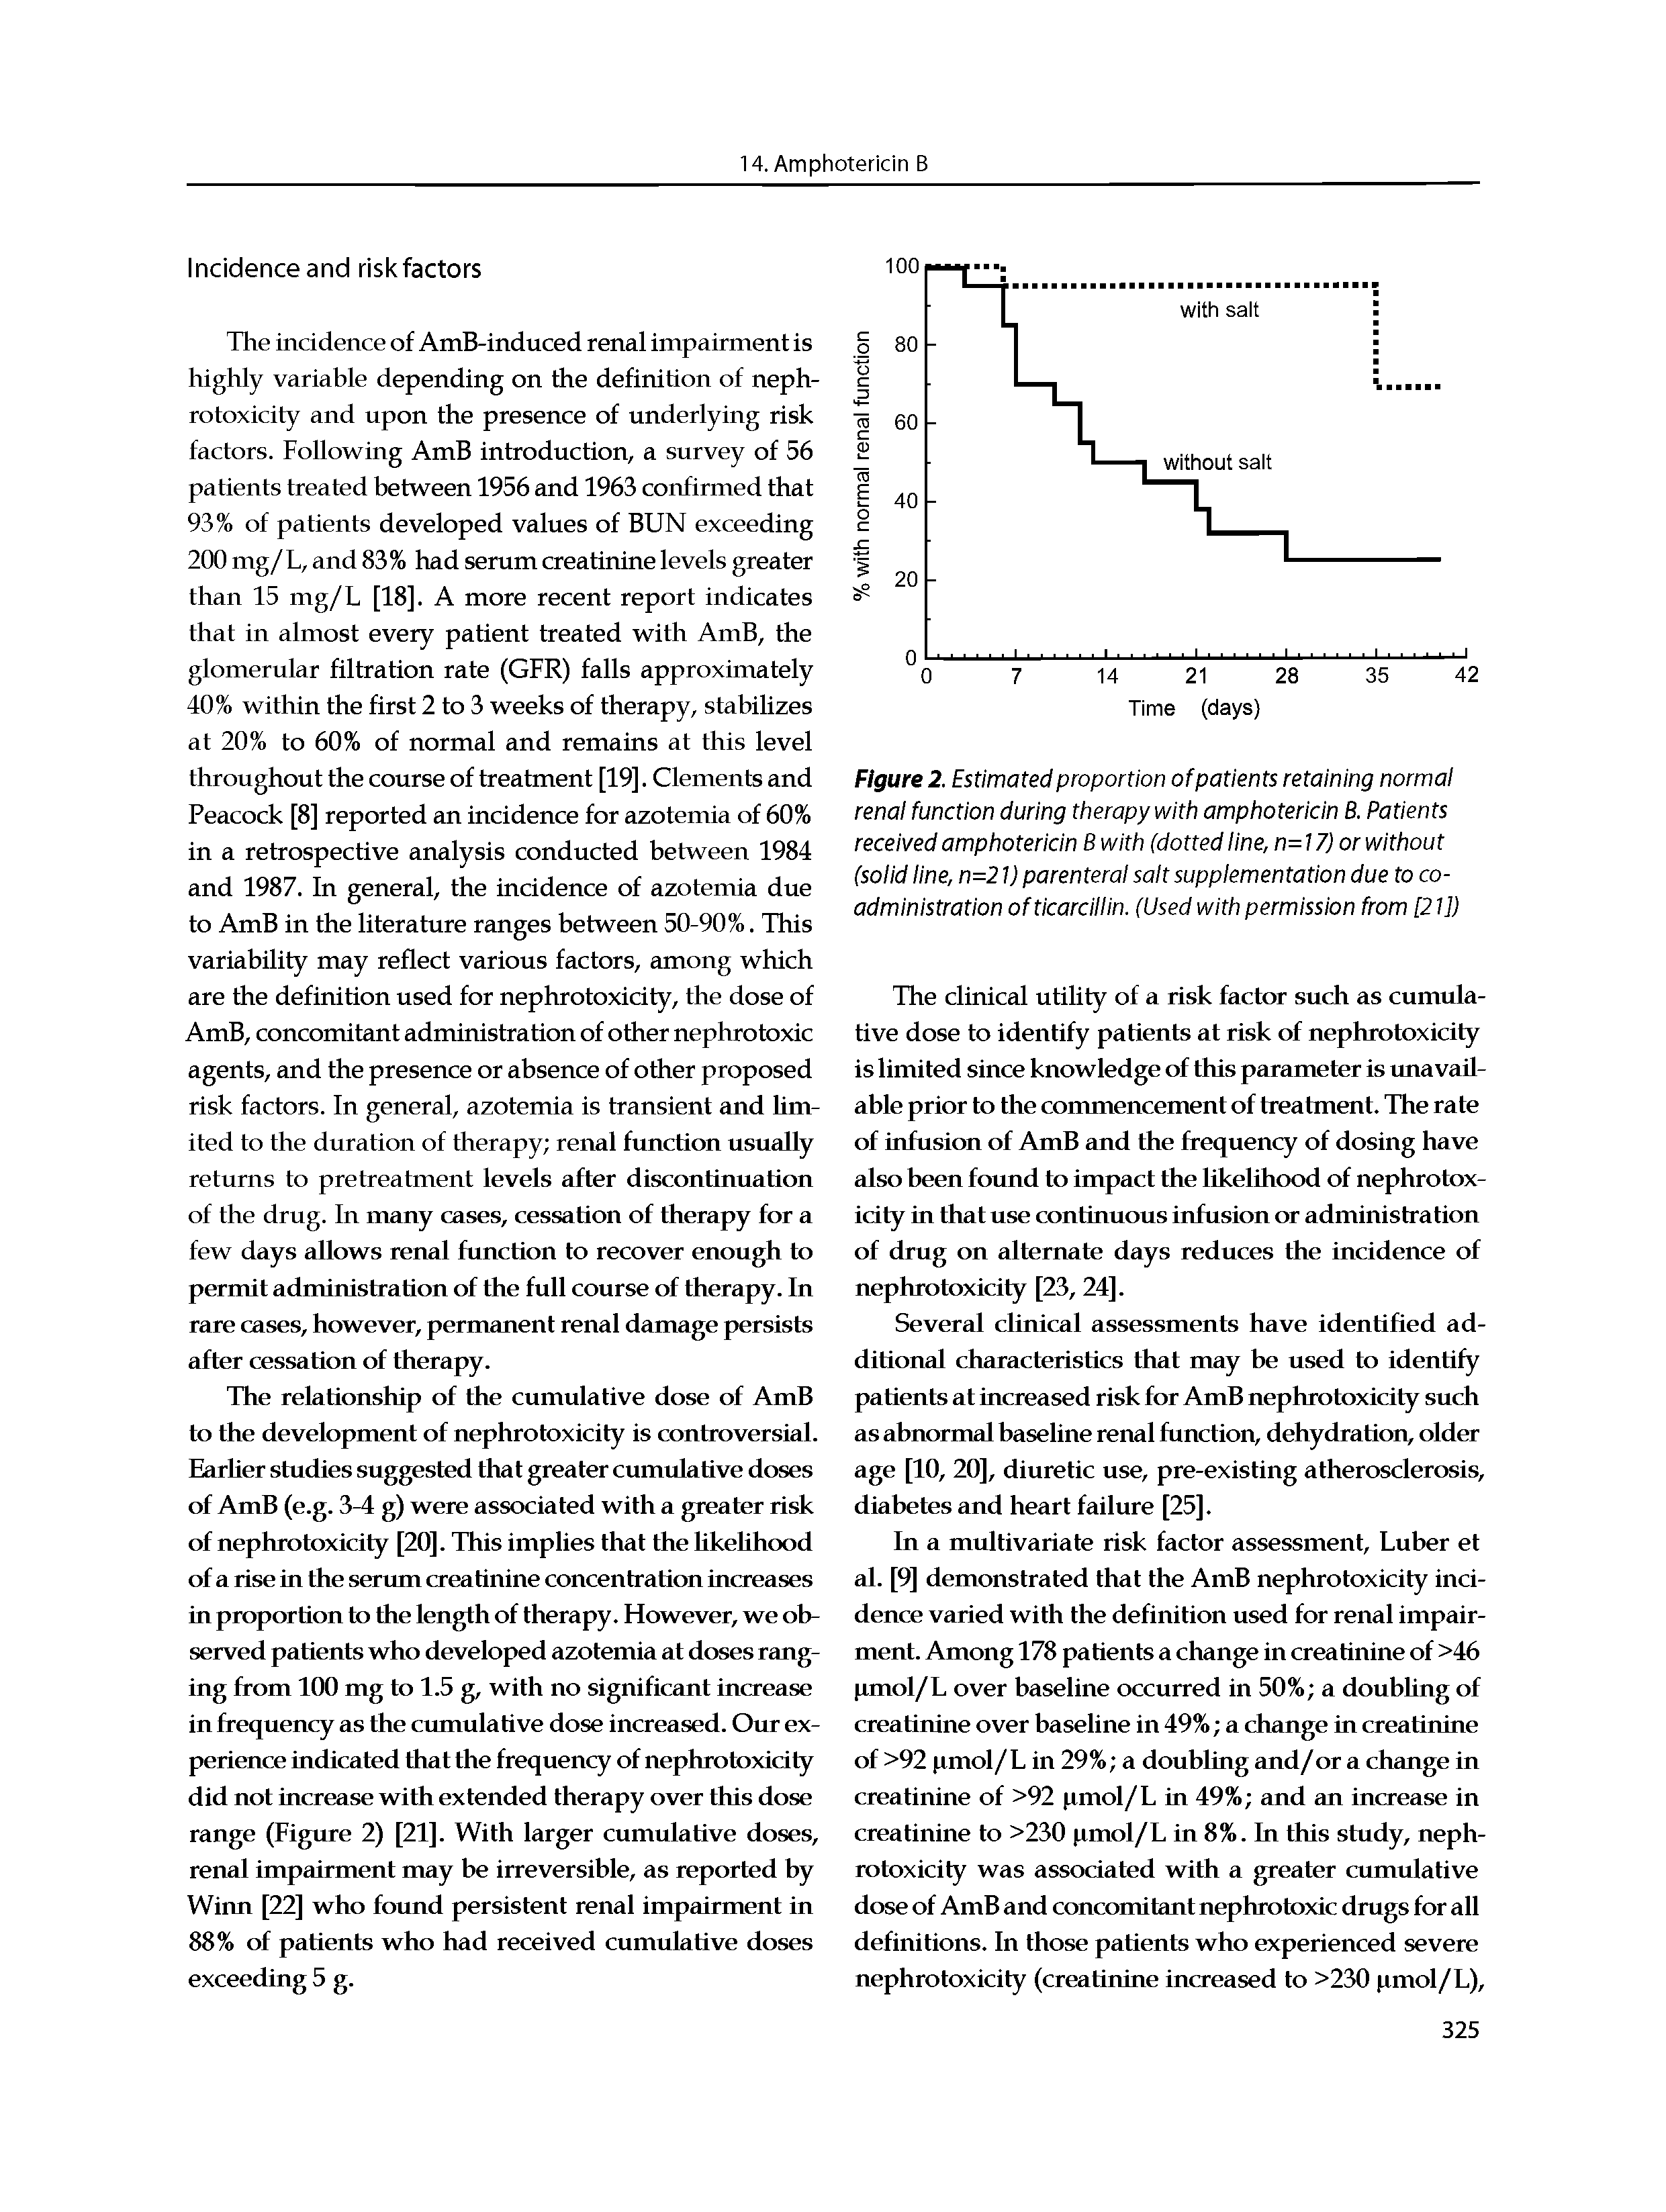 Figure 2. Estimated proportion of patients retaining normal renal function during therapy with amphotericin B. Patients received amphotericin B with (dotted line, n=17)or without (solid line, n=21) parenteral salt supplementation due to coadministration ofticarclliin. (Used with permission from [21])...